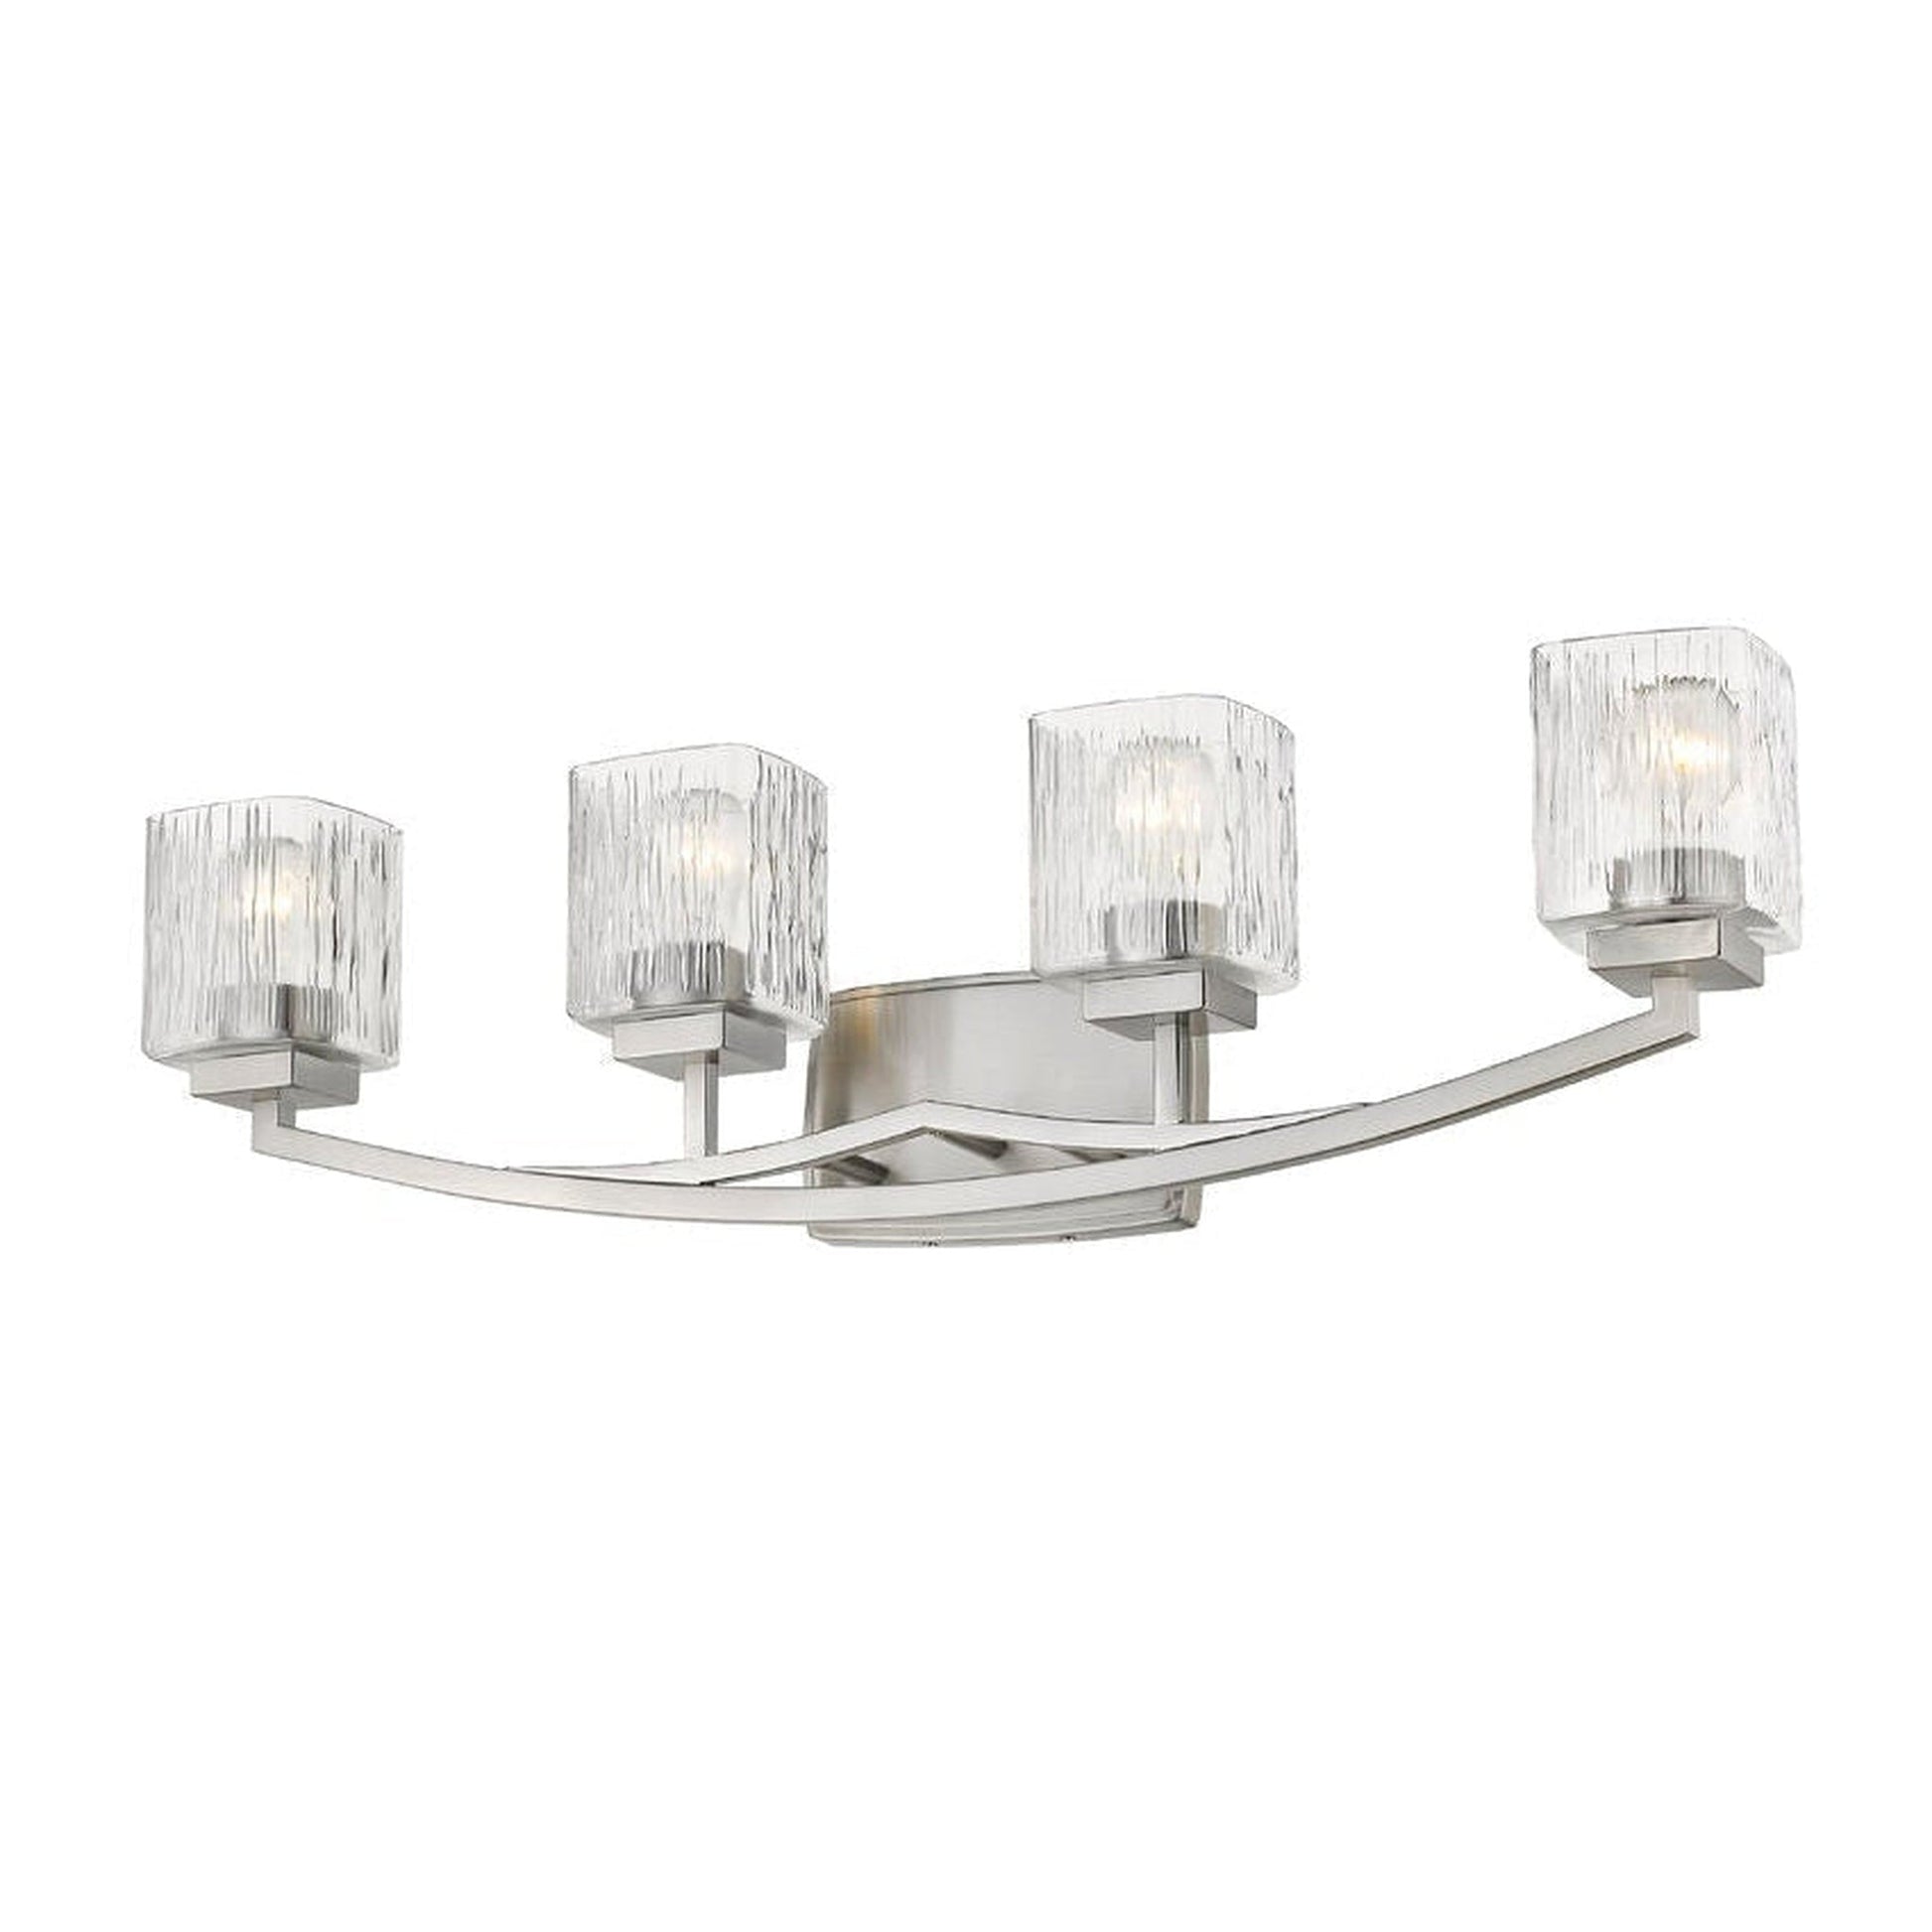 Z-Lite Zaid 32" 4-Light Brushed Nickel Vanity Light With Chisel Glass Shade